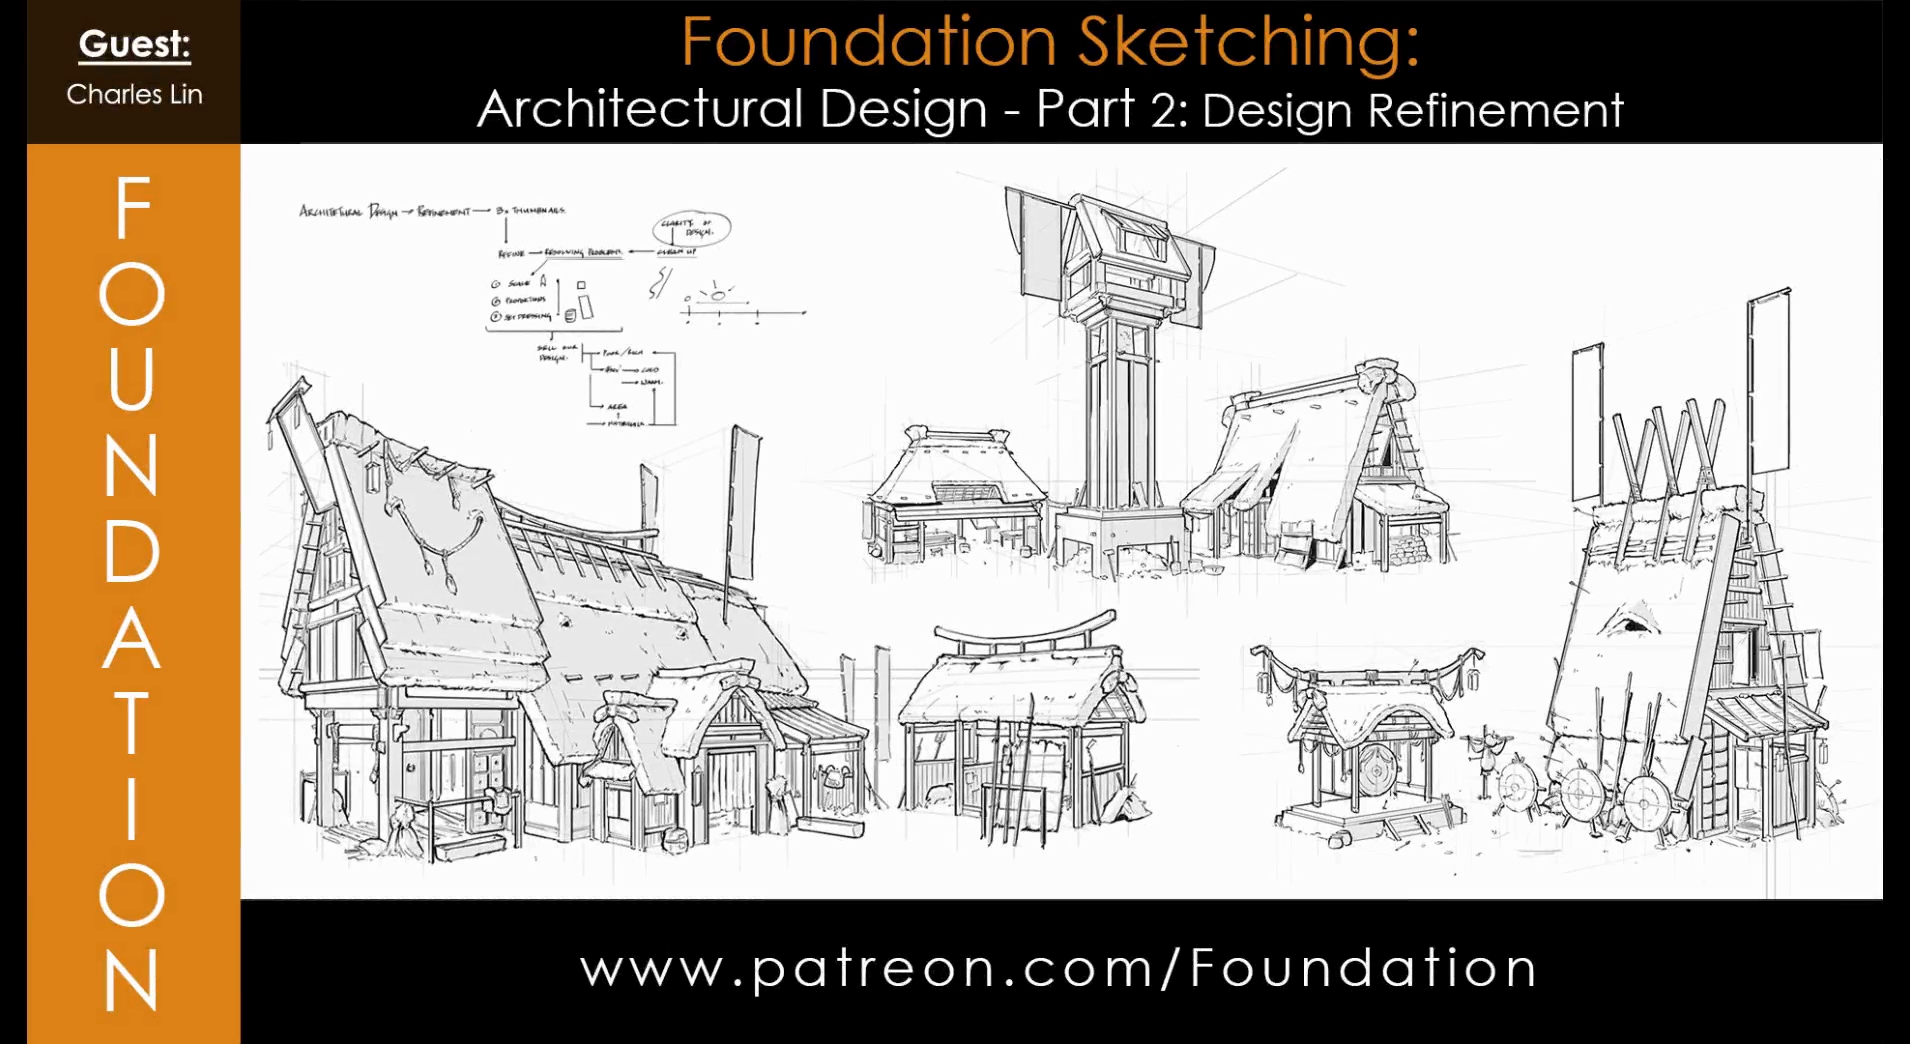 Foundation Sketching – Architectural Design Part 2 – Design Refinement with Charles Lin